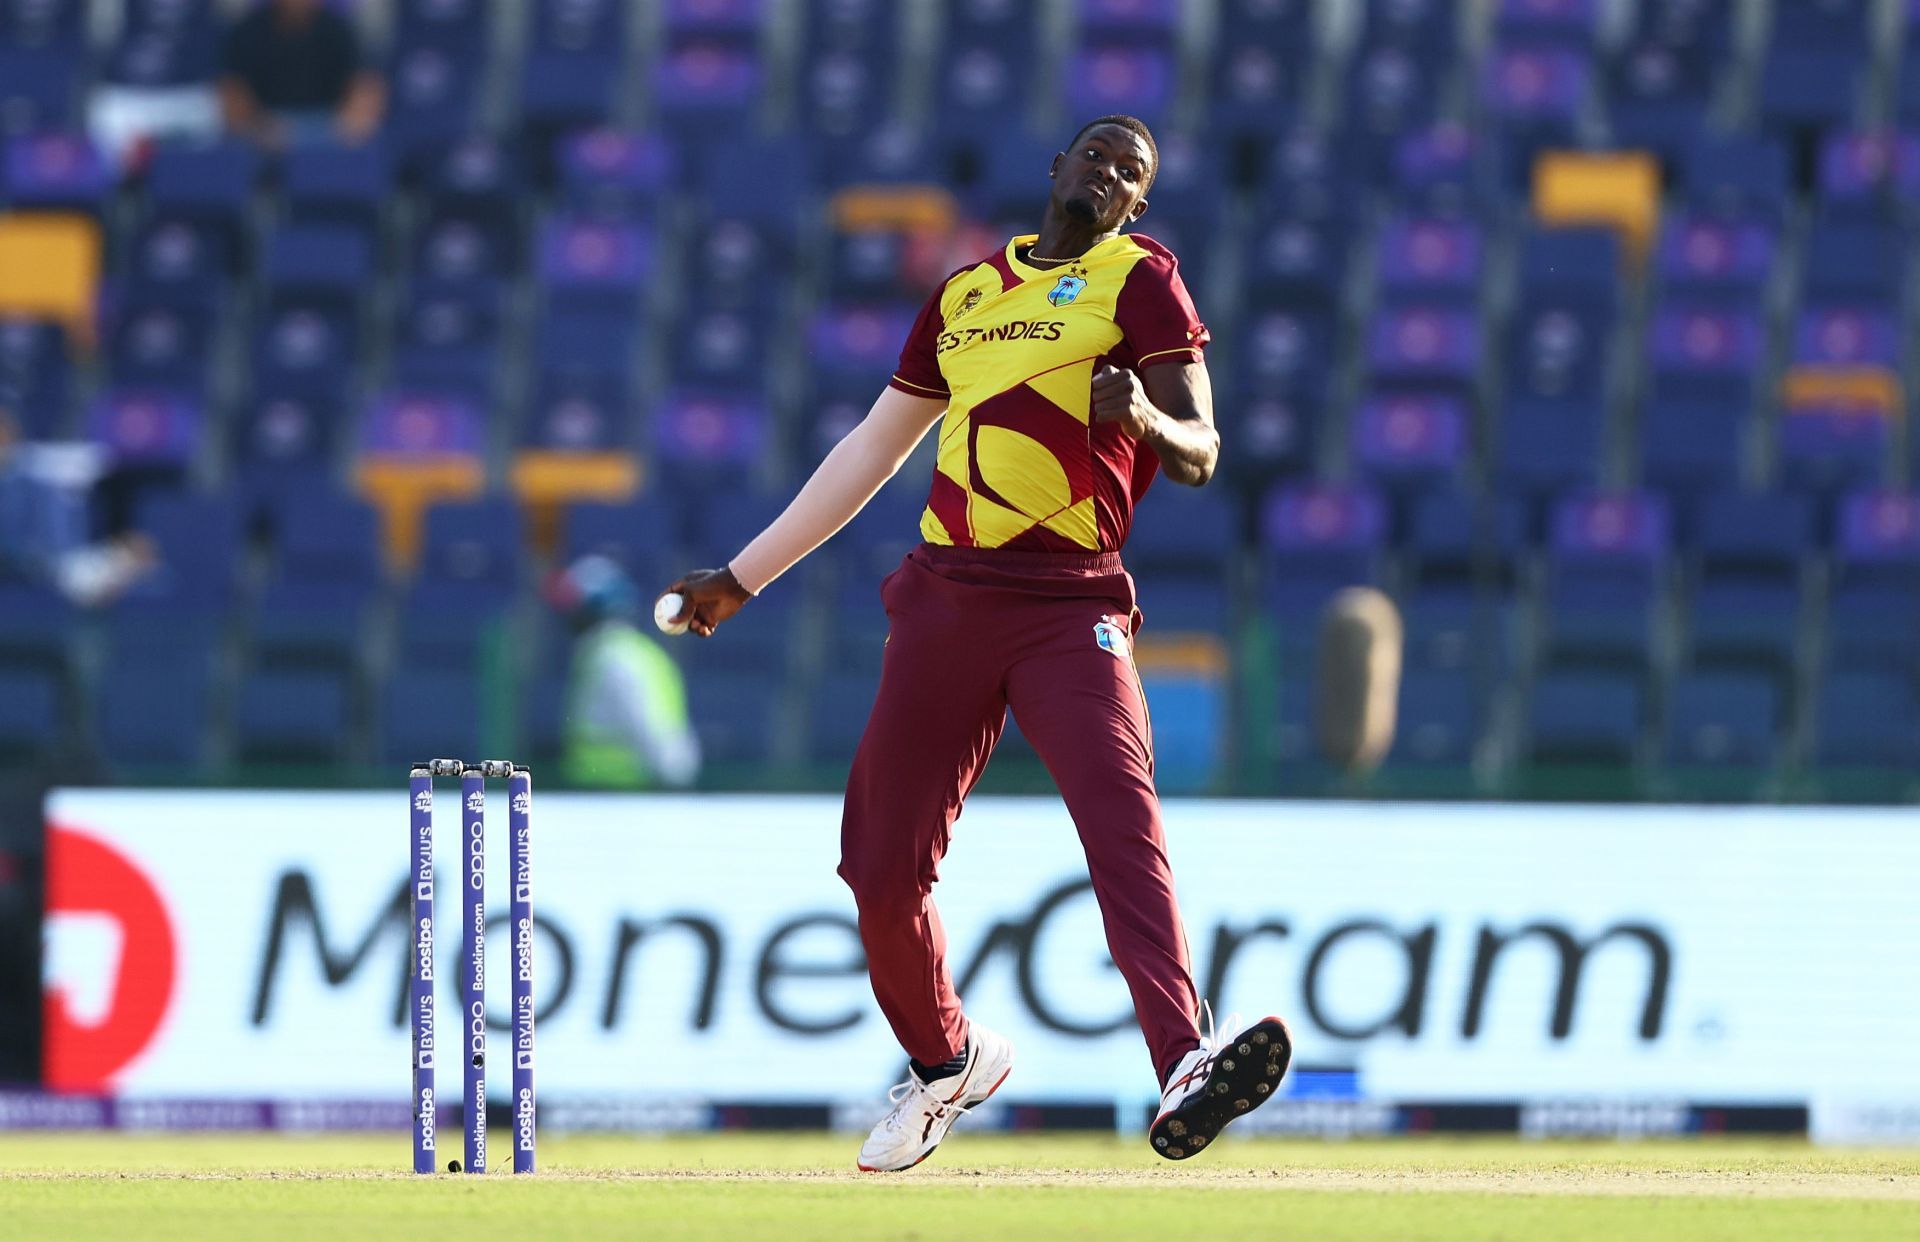 Jason Holder has emerged as one of the finest all-rounders in the game.